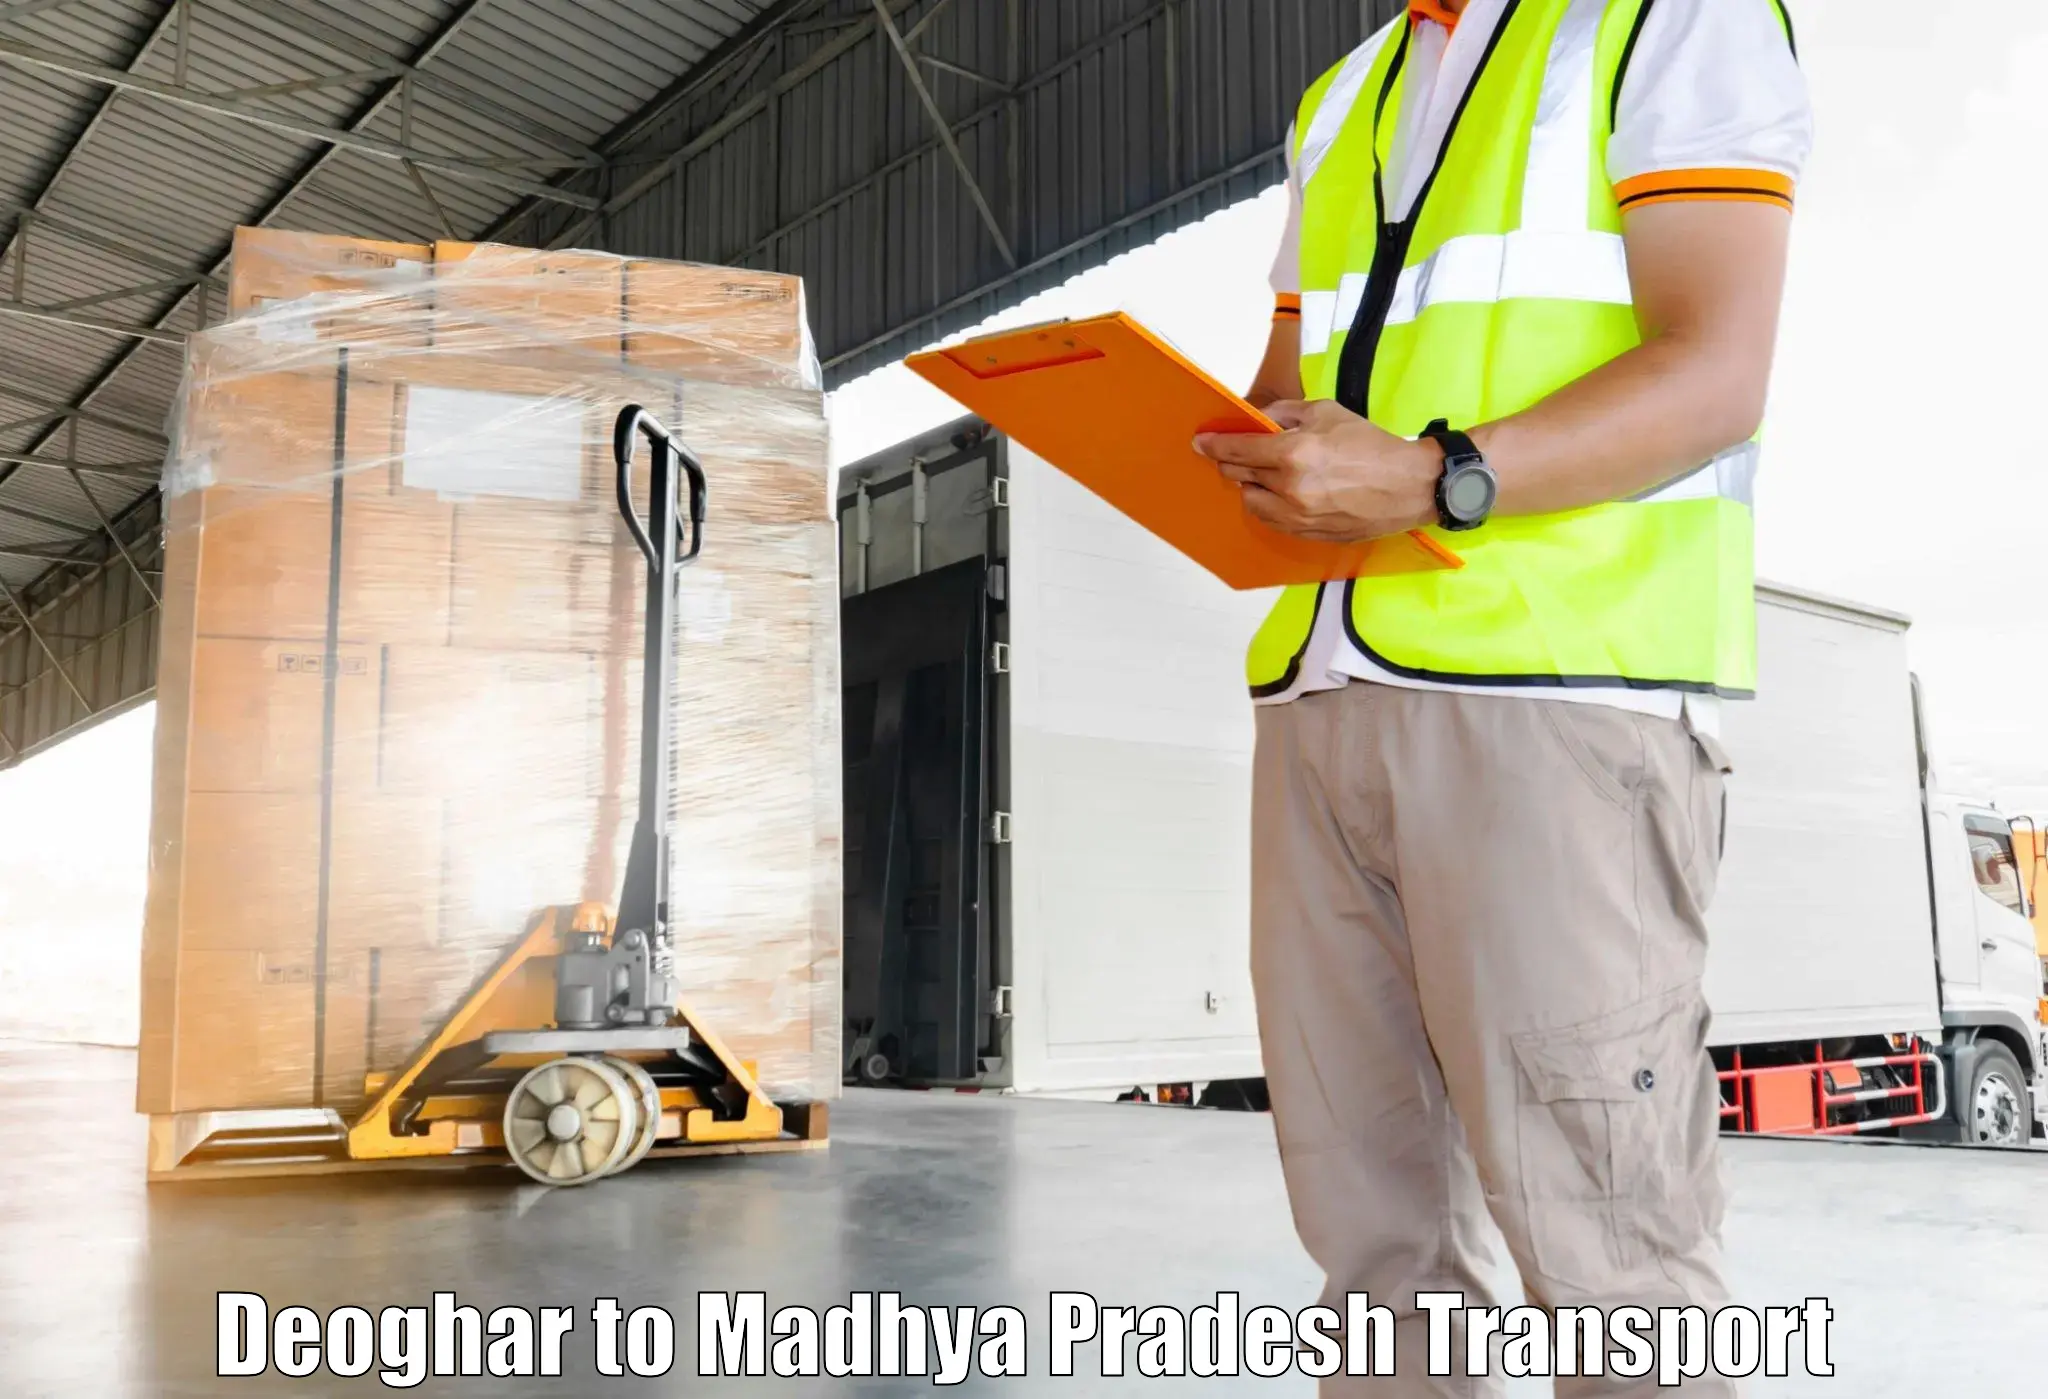 Nationwide transport services Deoghar to Madwas